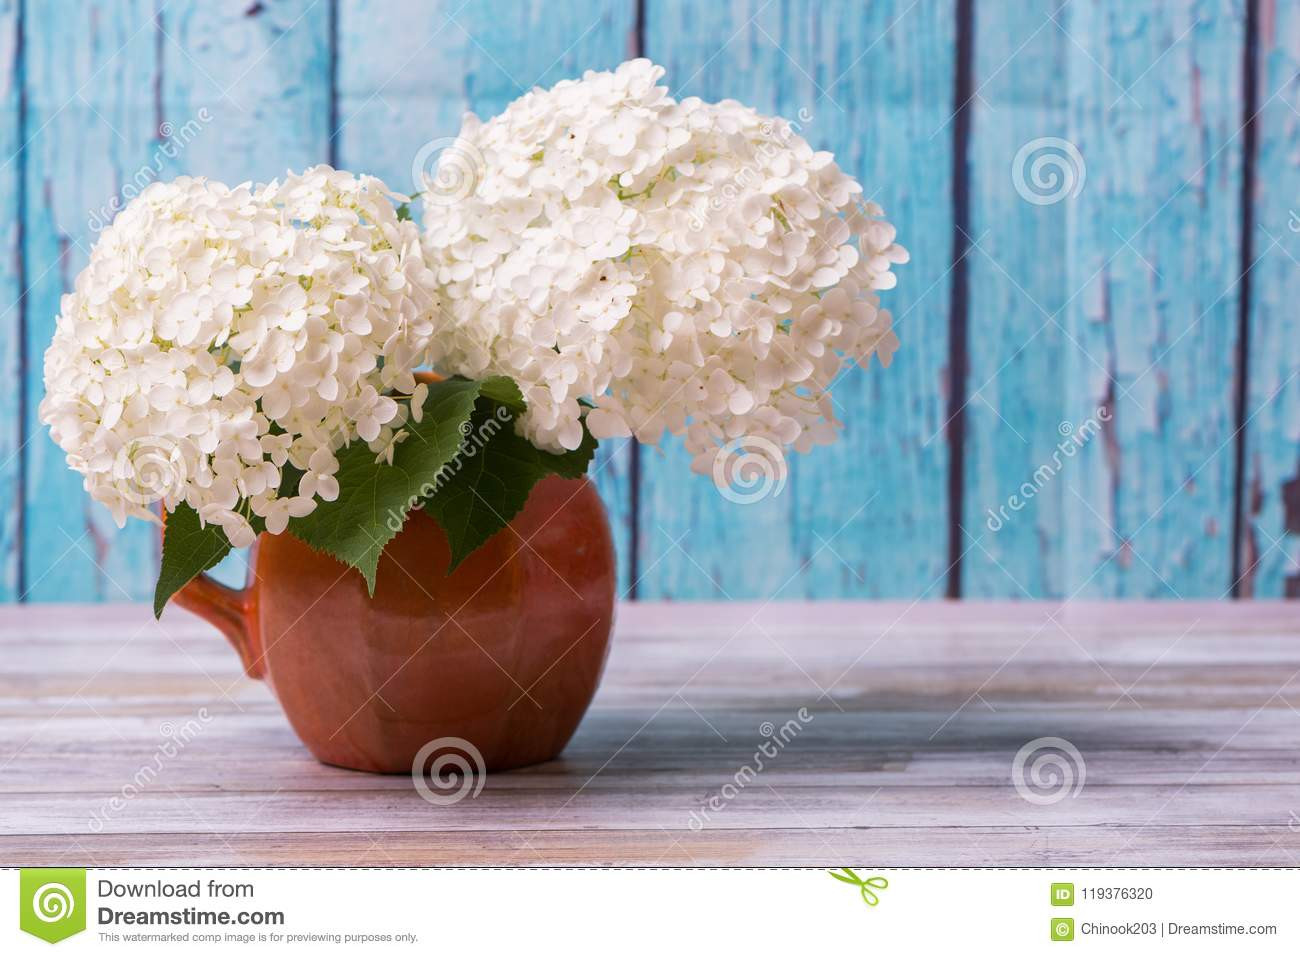 18 Trendy Vintage Colored Glass Vases 2024 free download vintage colored glass vases of white hydrangea flowers in a rustic vase with blue background stock regarding white hydrangea flowers in a rustic vase with blue background